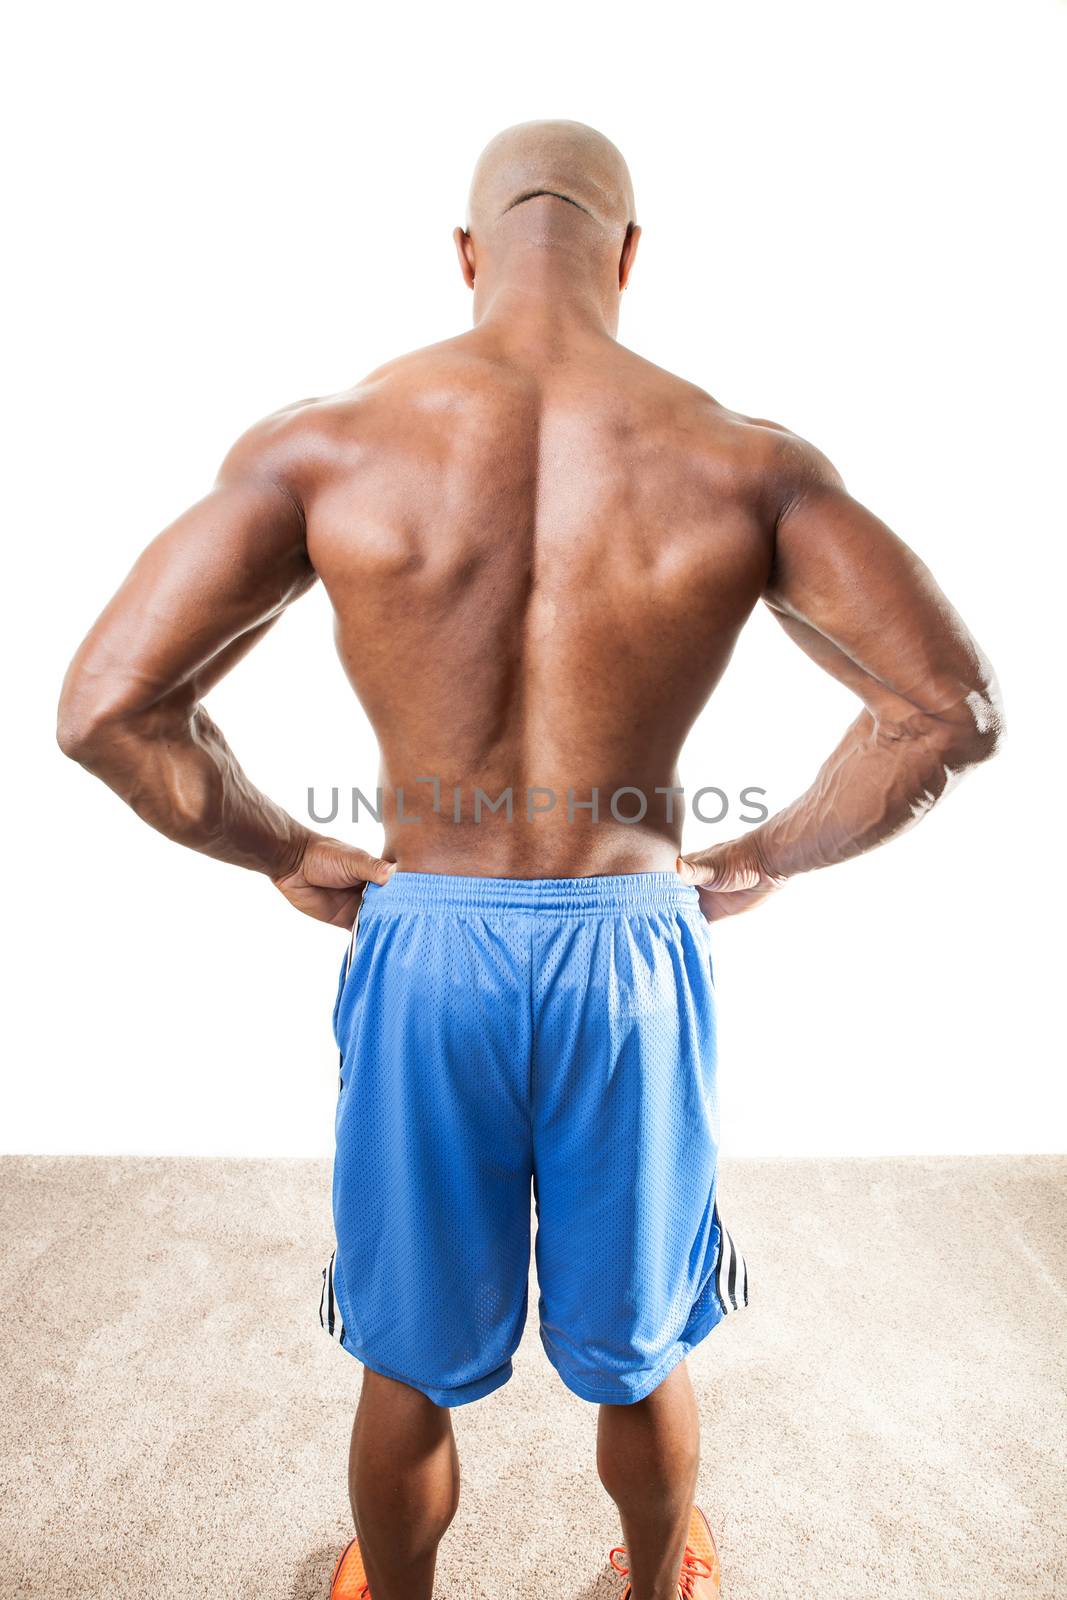 Toned and ripped lean muscle fitness man standing in front of a white background.